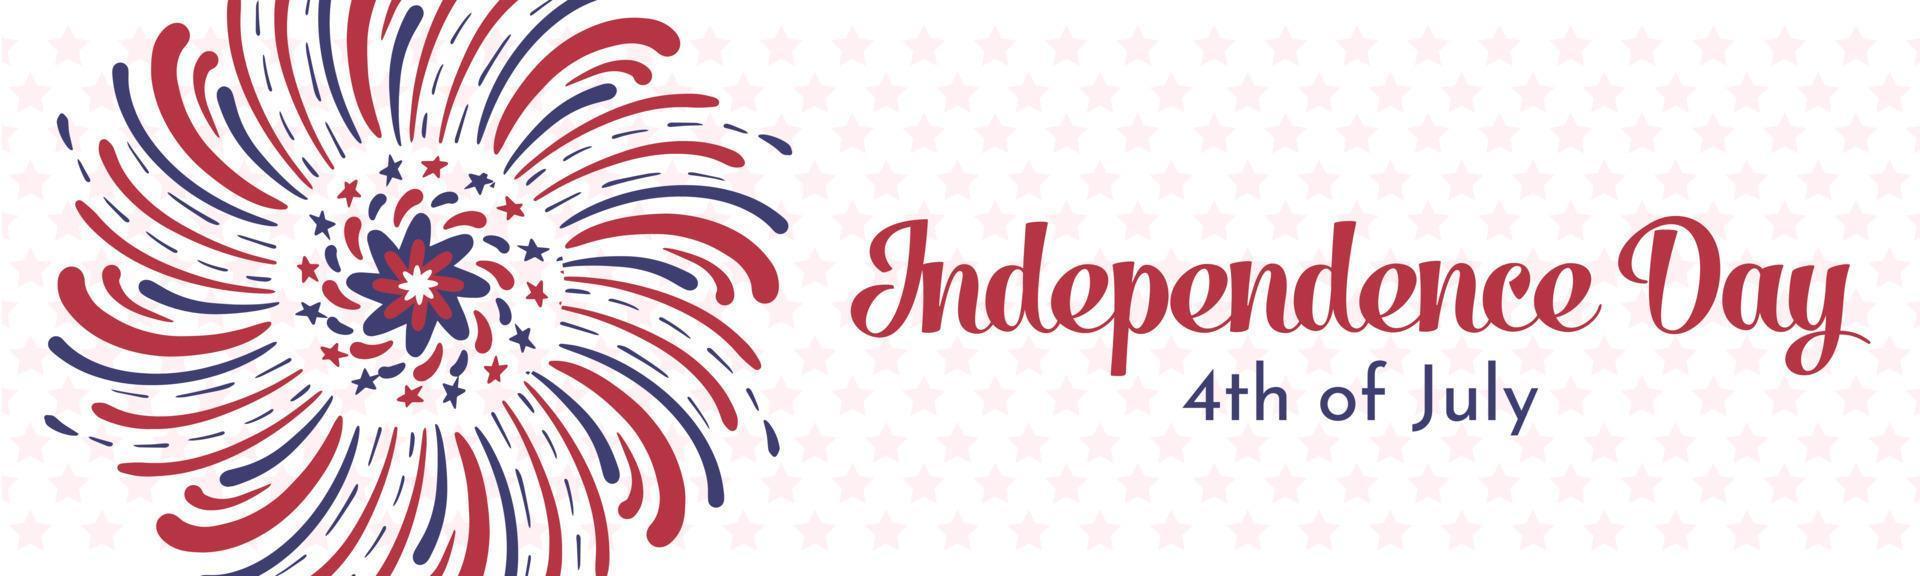 Banner for 4th of July, Independence Day.  Artistic hand drawn fireworks with american flag red and blue lines and stars. Long horizontal vector banner template design.